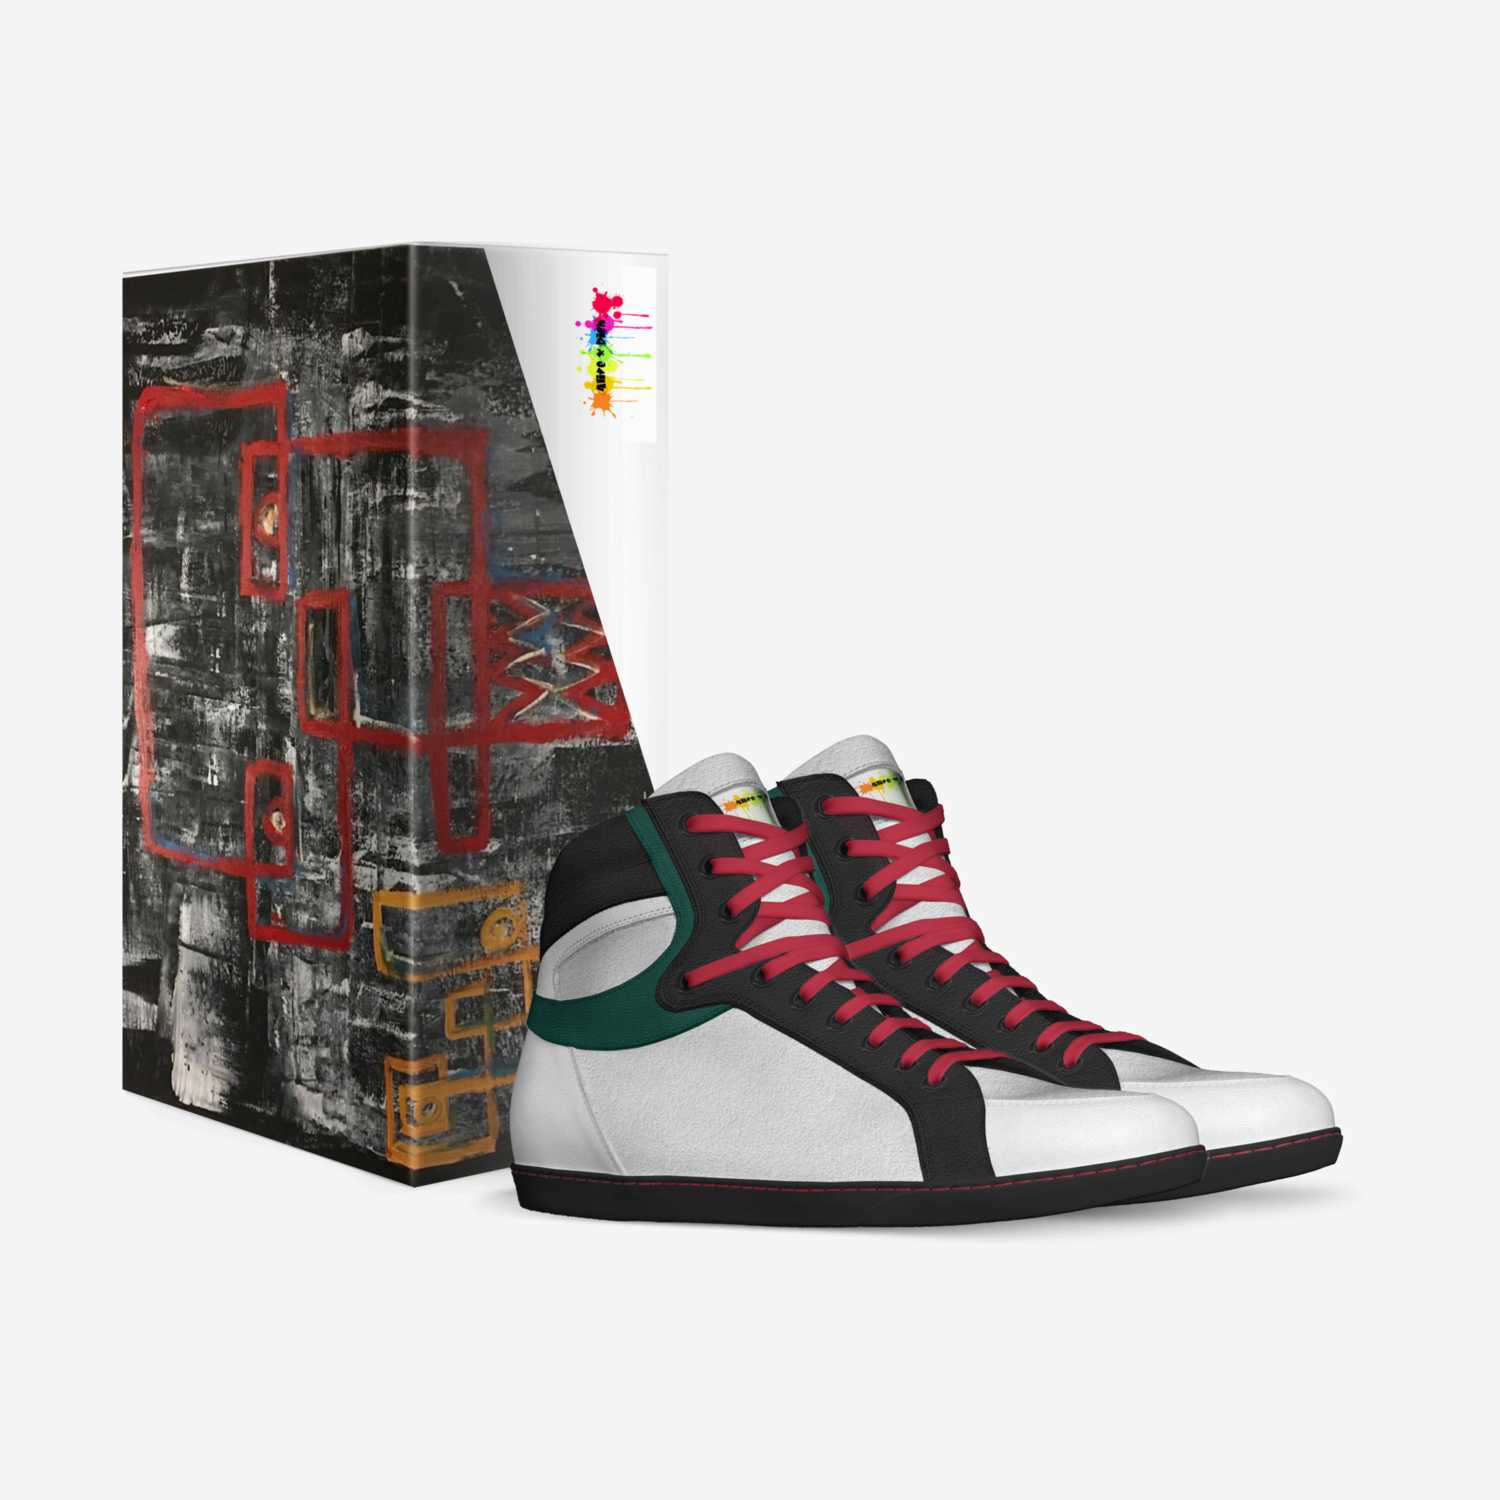 Alive X Rich custom made in Italy shoes by Richard Burgos | Box view